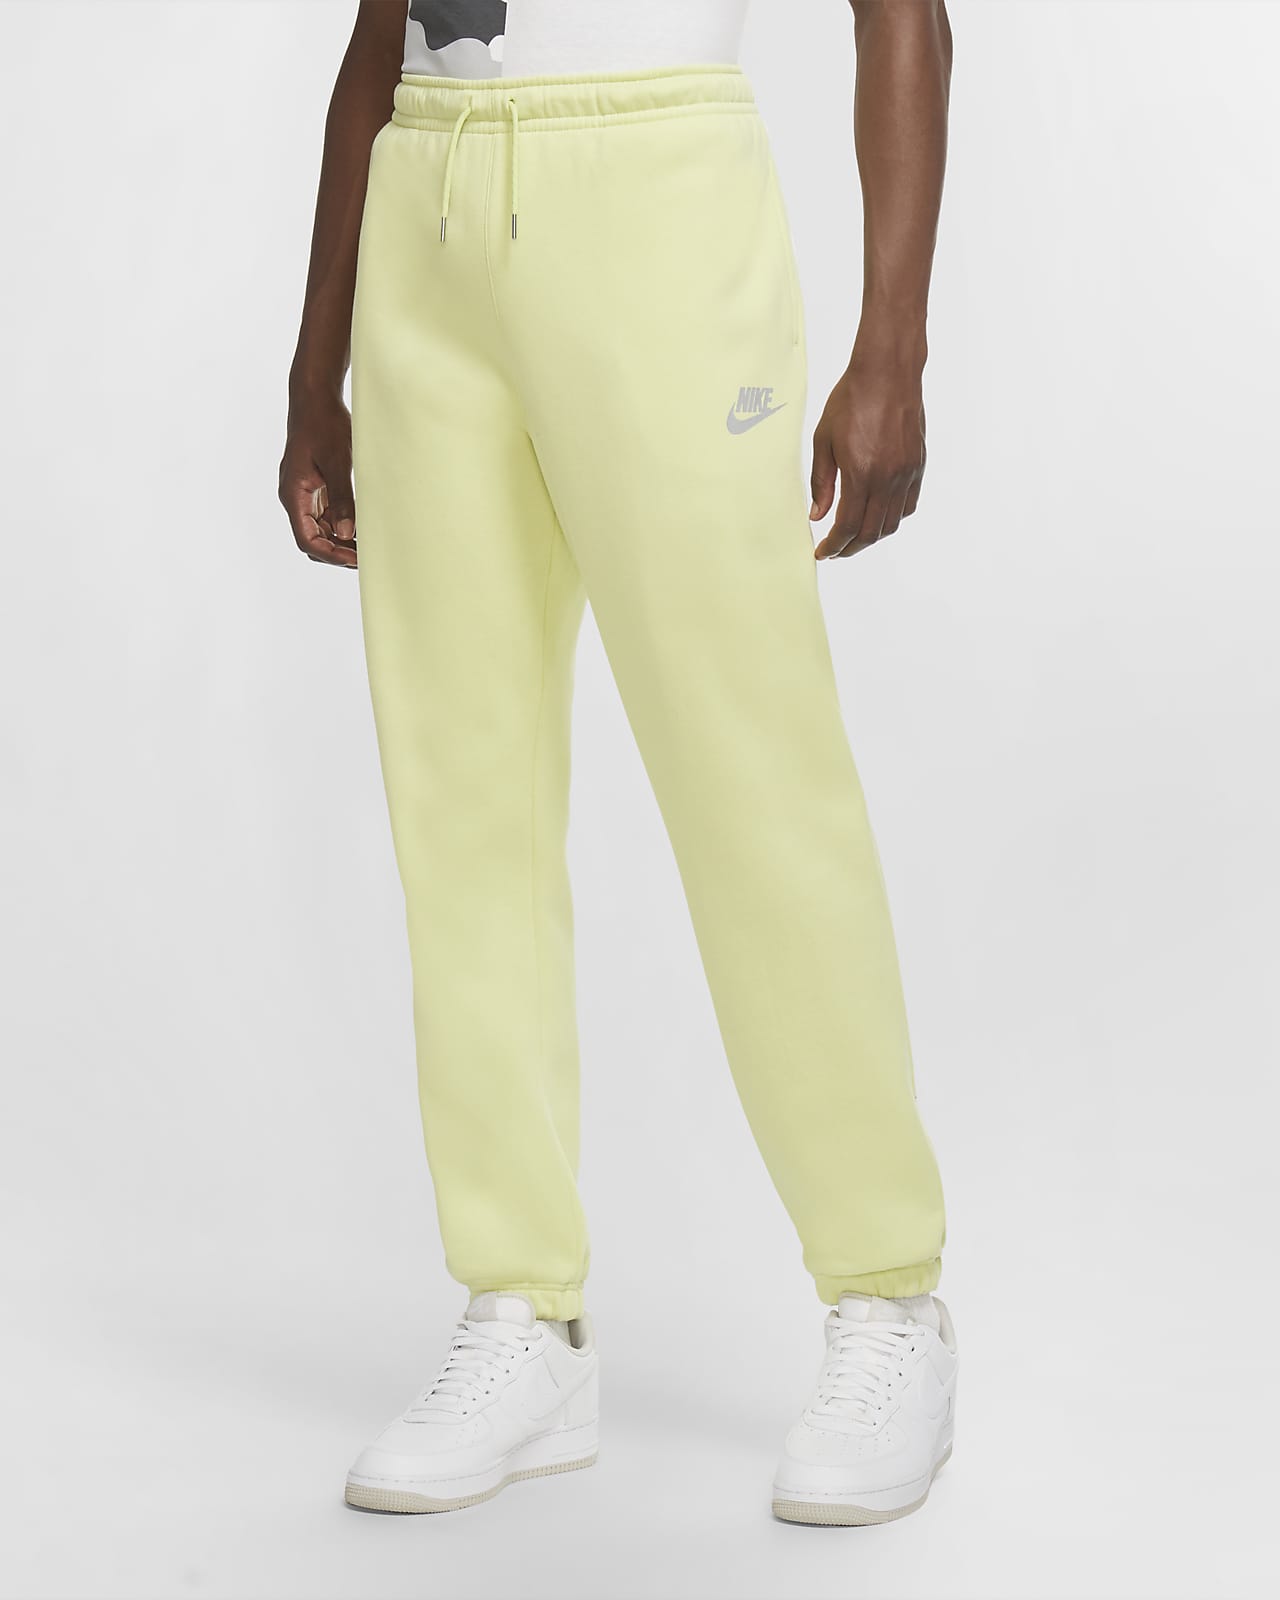 nike cotton lowers for mens